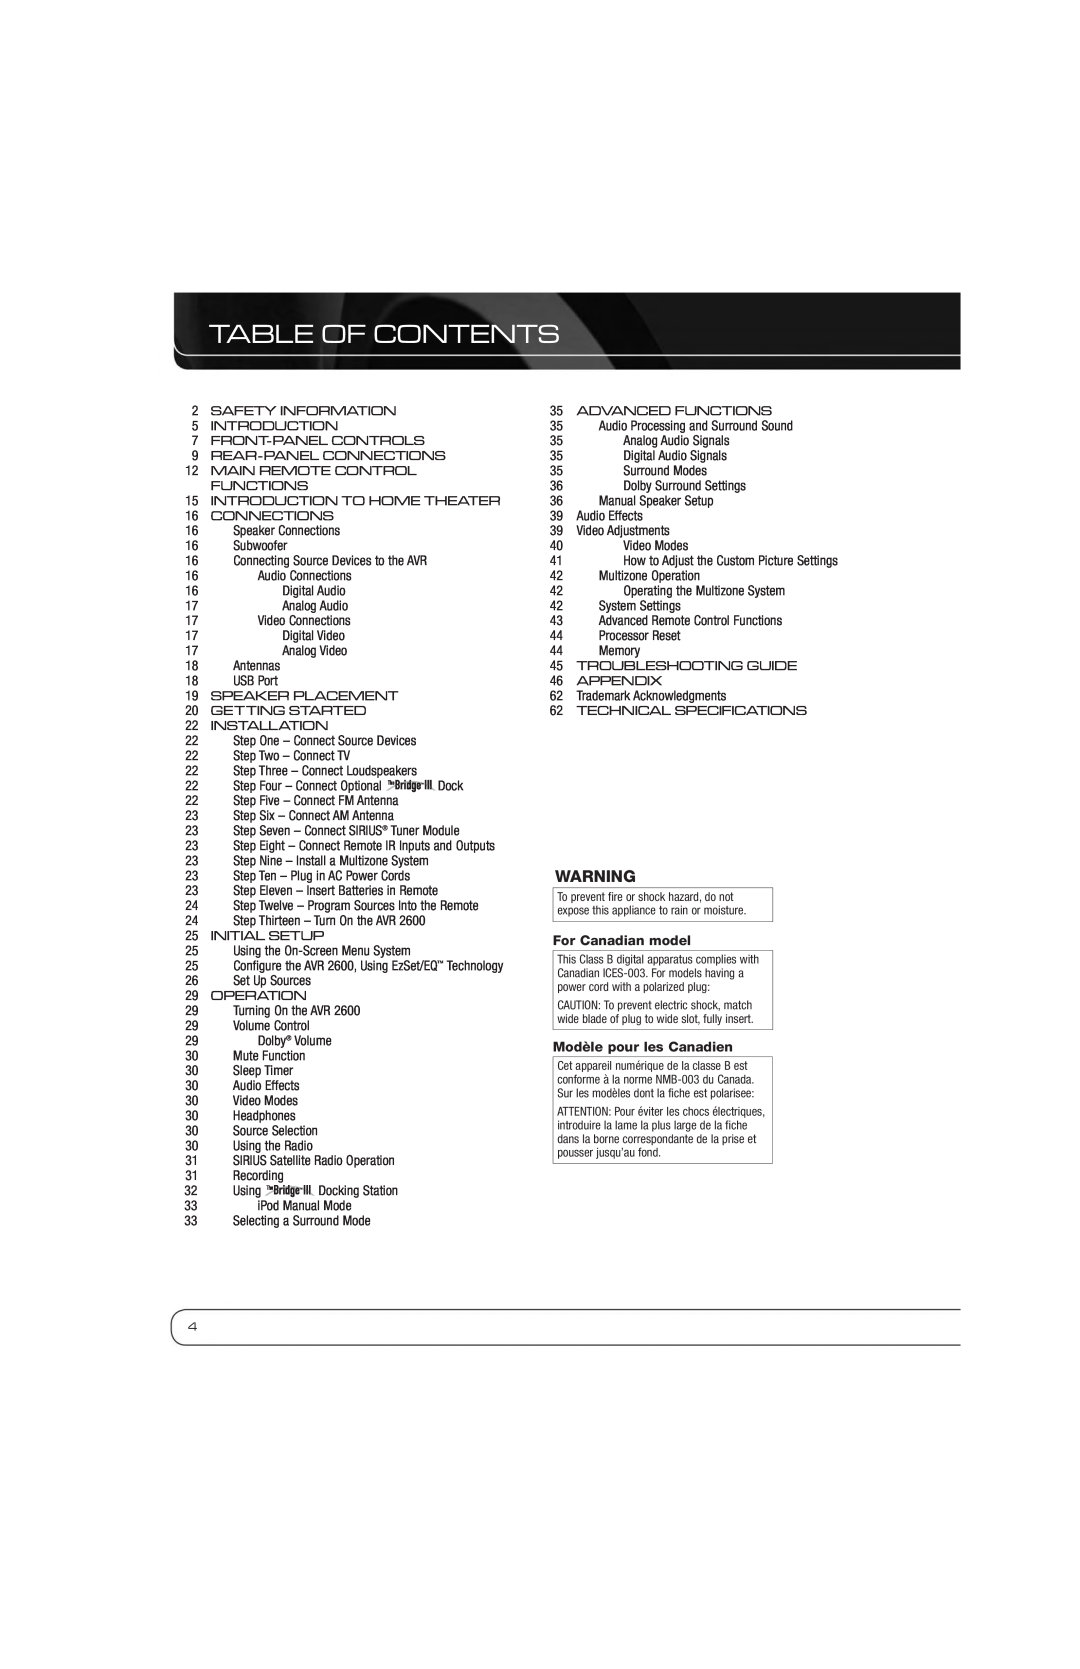 Harman AVR 2600 owner manual Table Of Contents, For Canadian model, Modèle pour les Canadien 